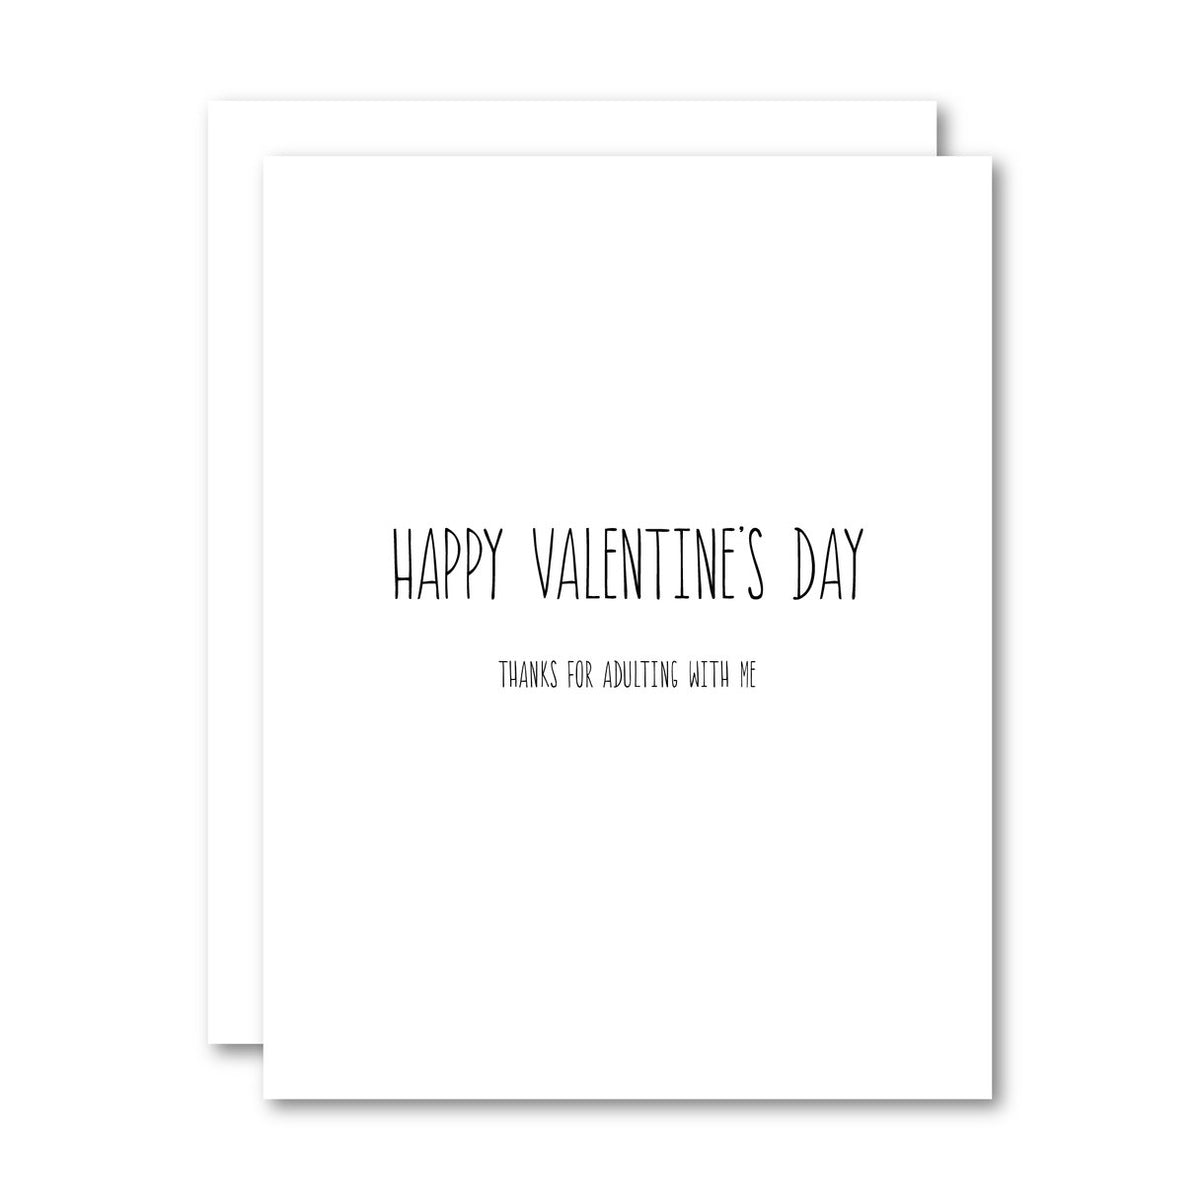 Living Fresh Flower and Plant Studio - Happy Valentines Day Card